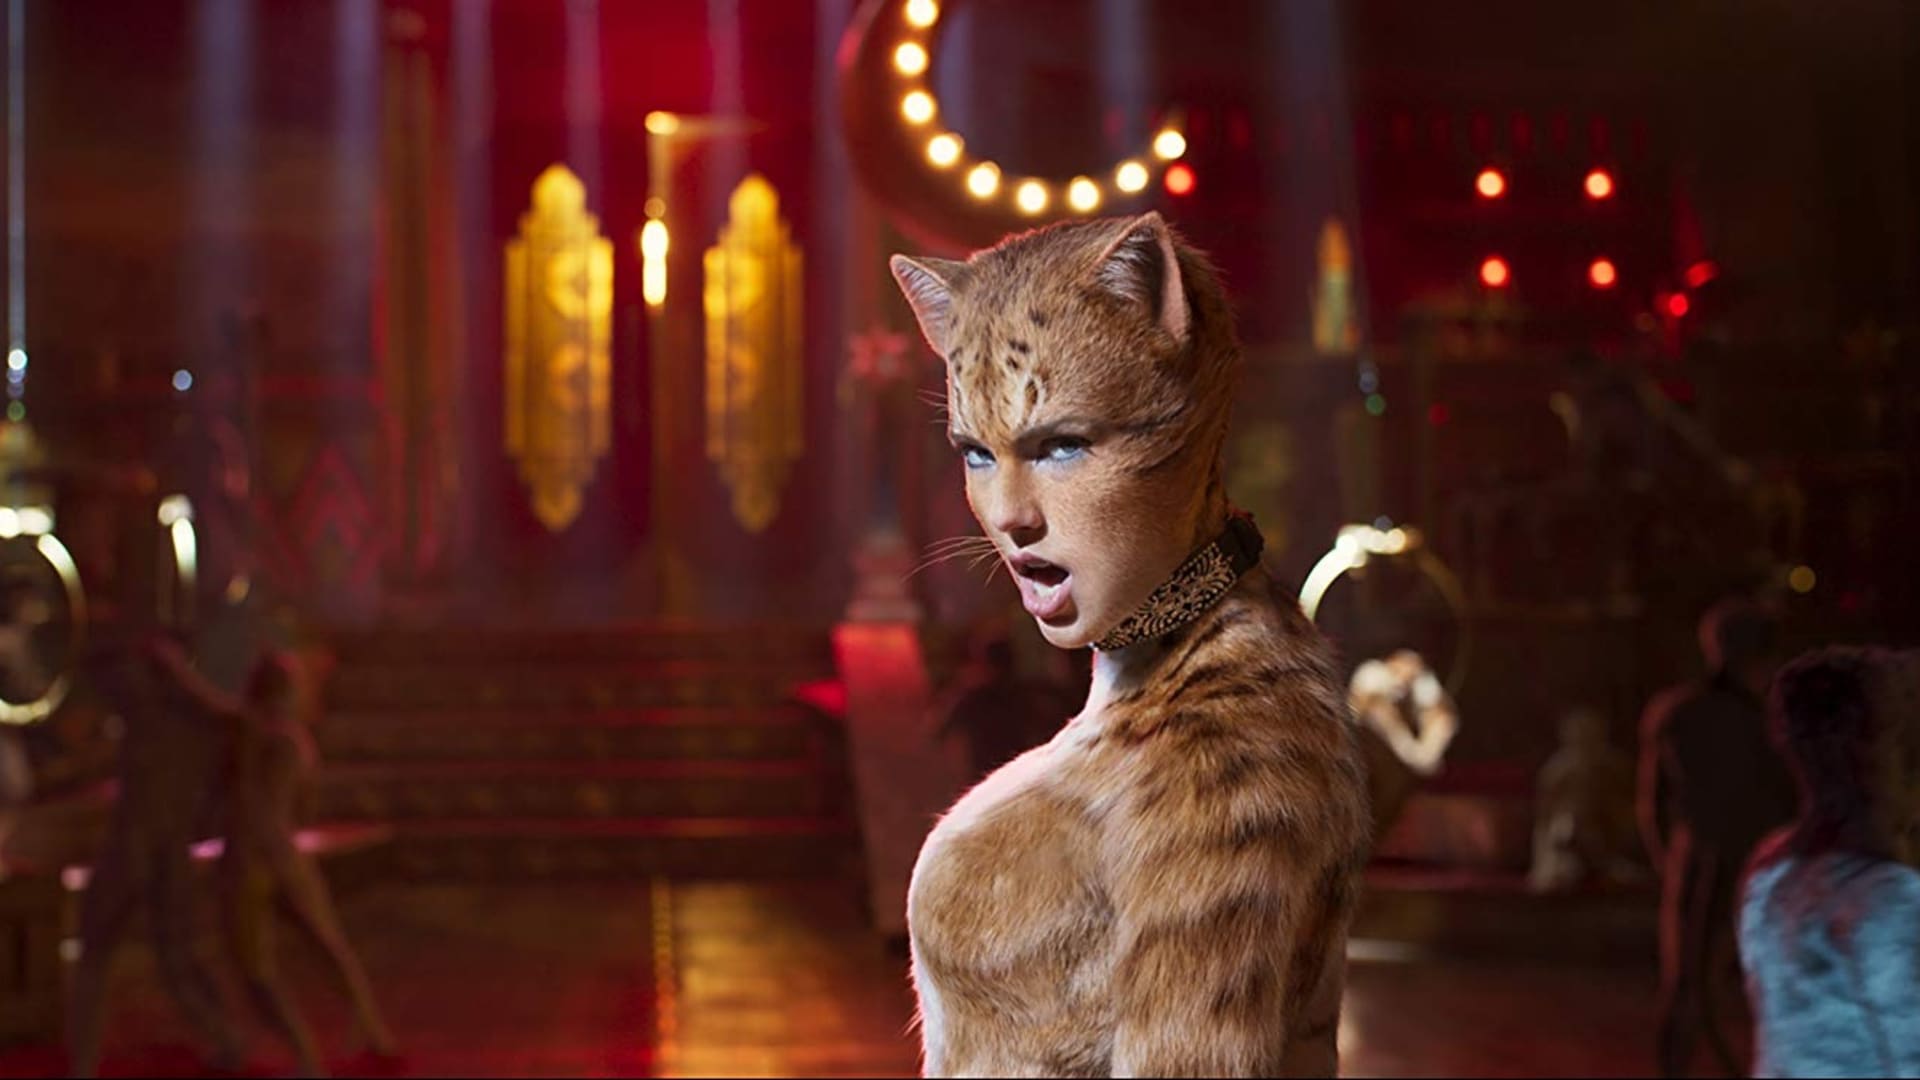 Movie Review: 'Cats' is sad, and not in a good way